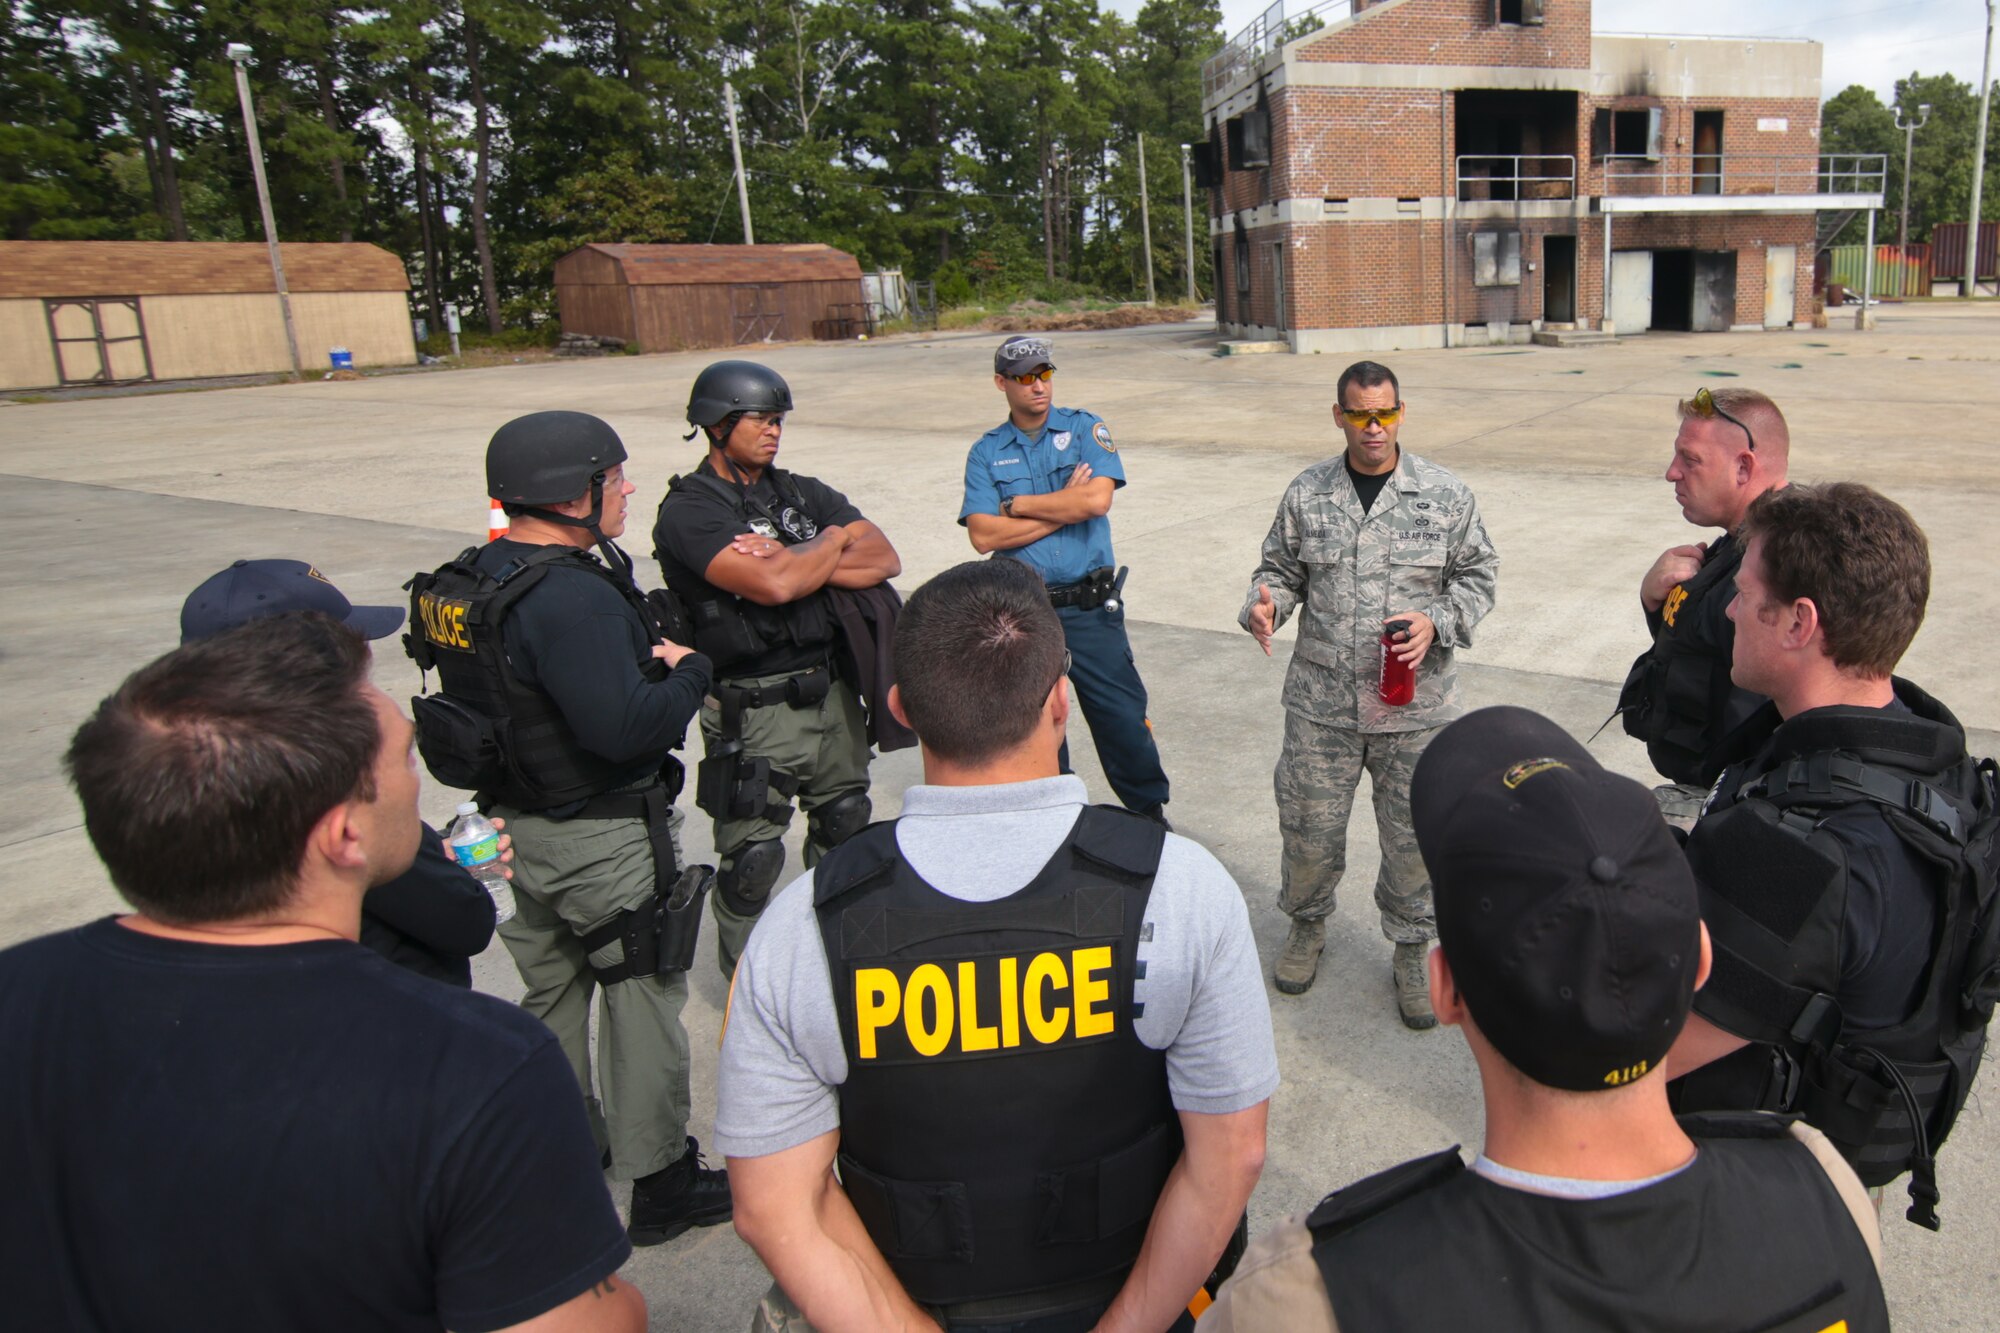 A picture of U.S. Air Force Master Sgt. Jose Almeida instructing law enforcement officers on various ways to carry injured people during Tactical Combat Casualty Care training.